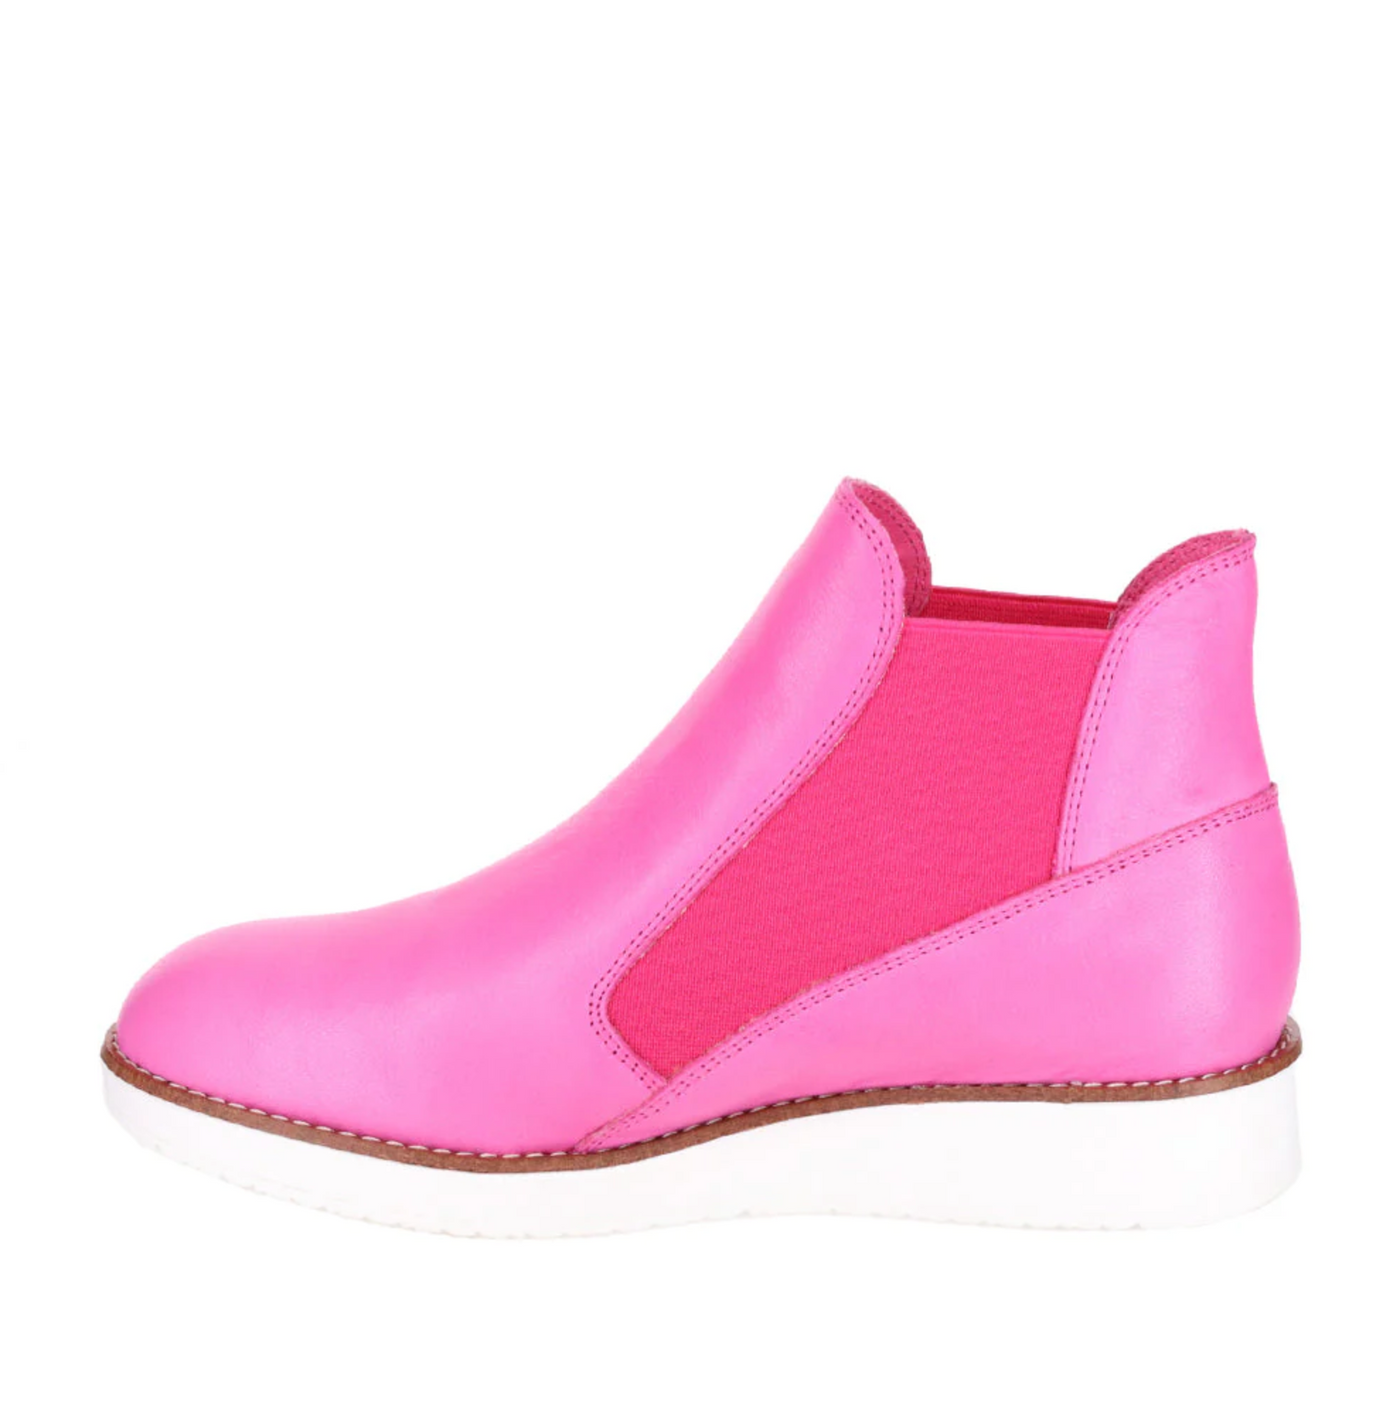 LESANSA RALLY HOT PINK - Women Boots - Collective Shoes 